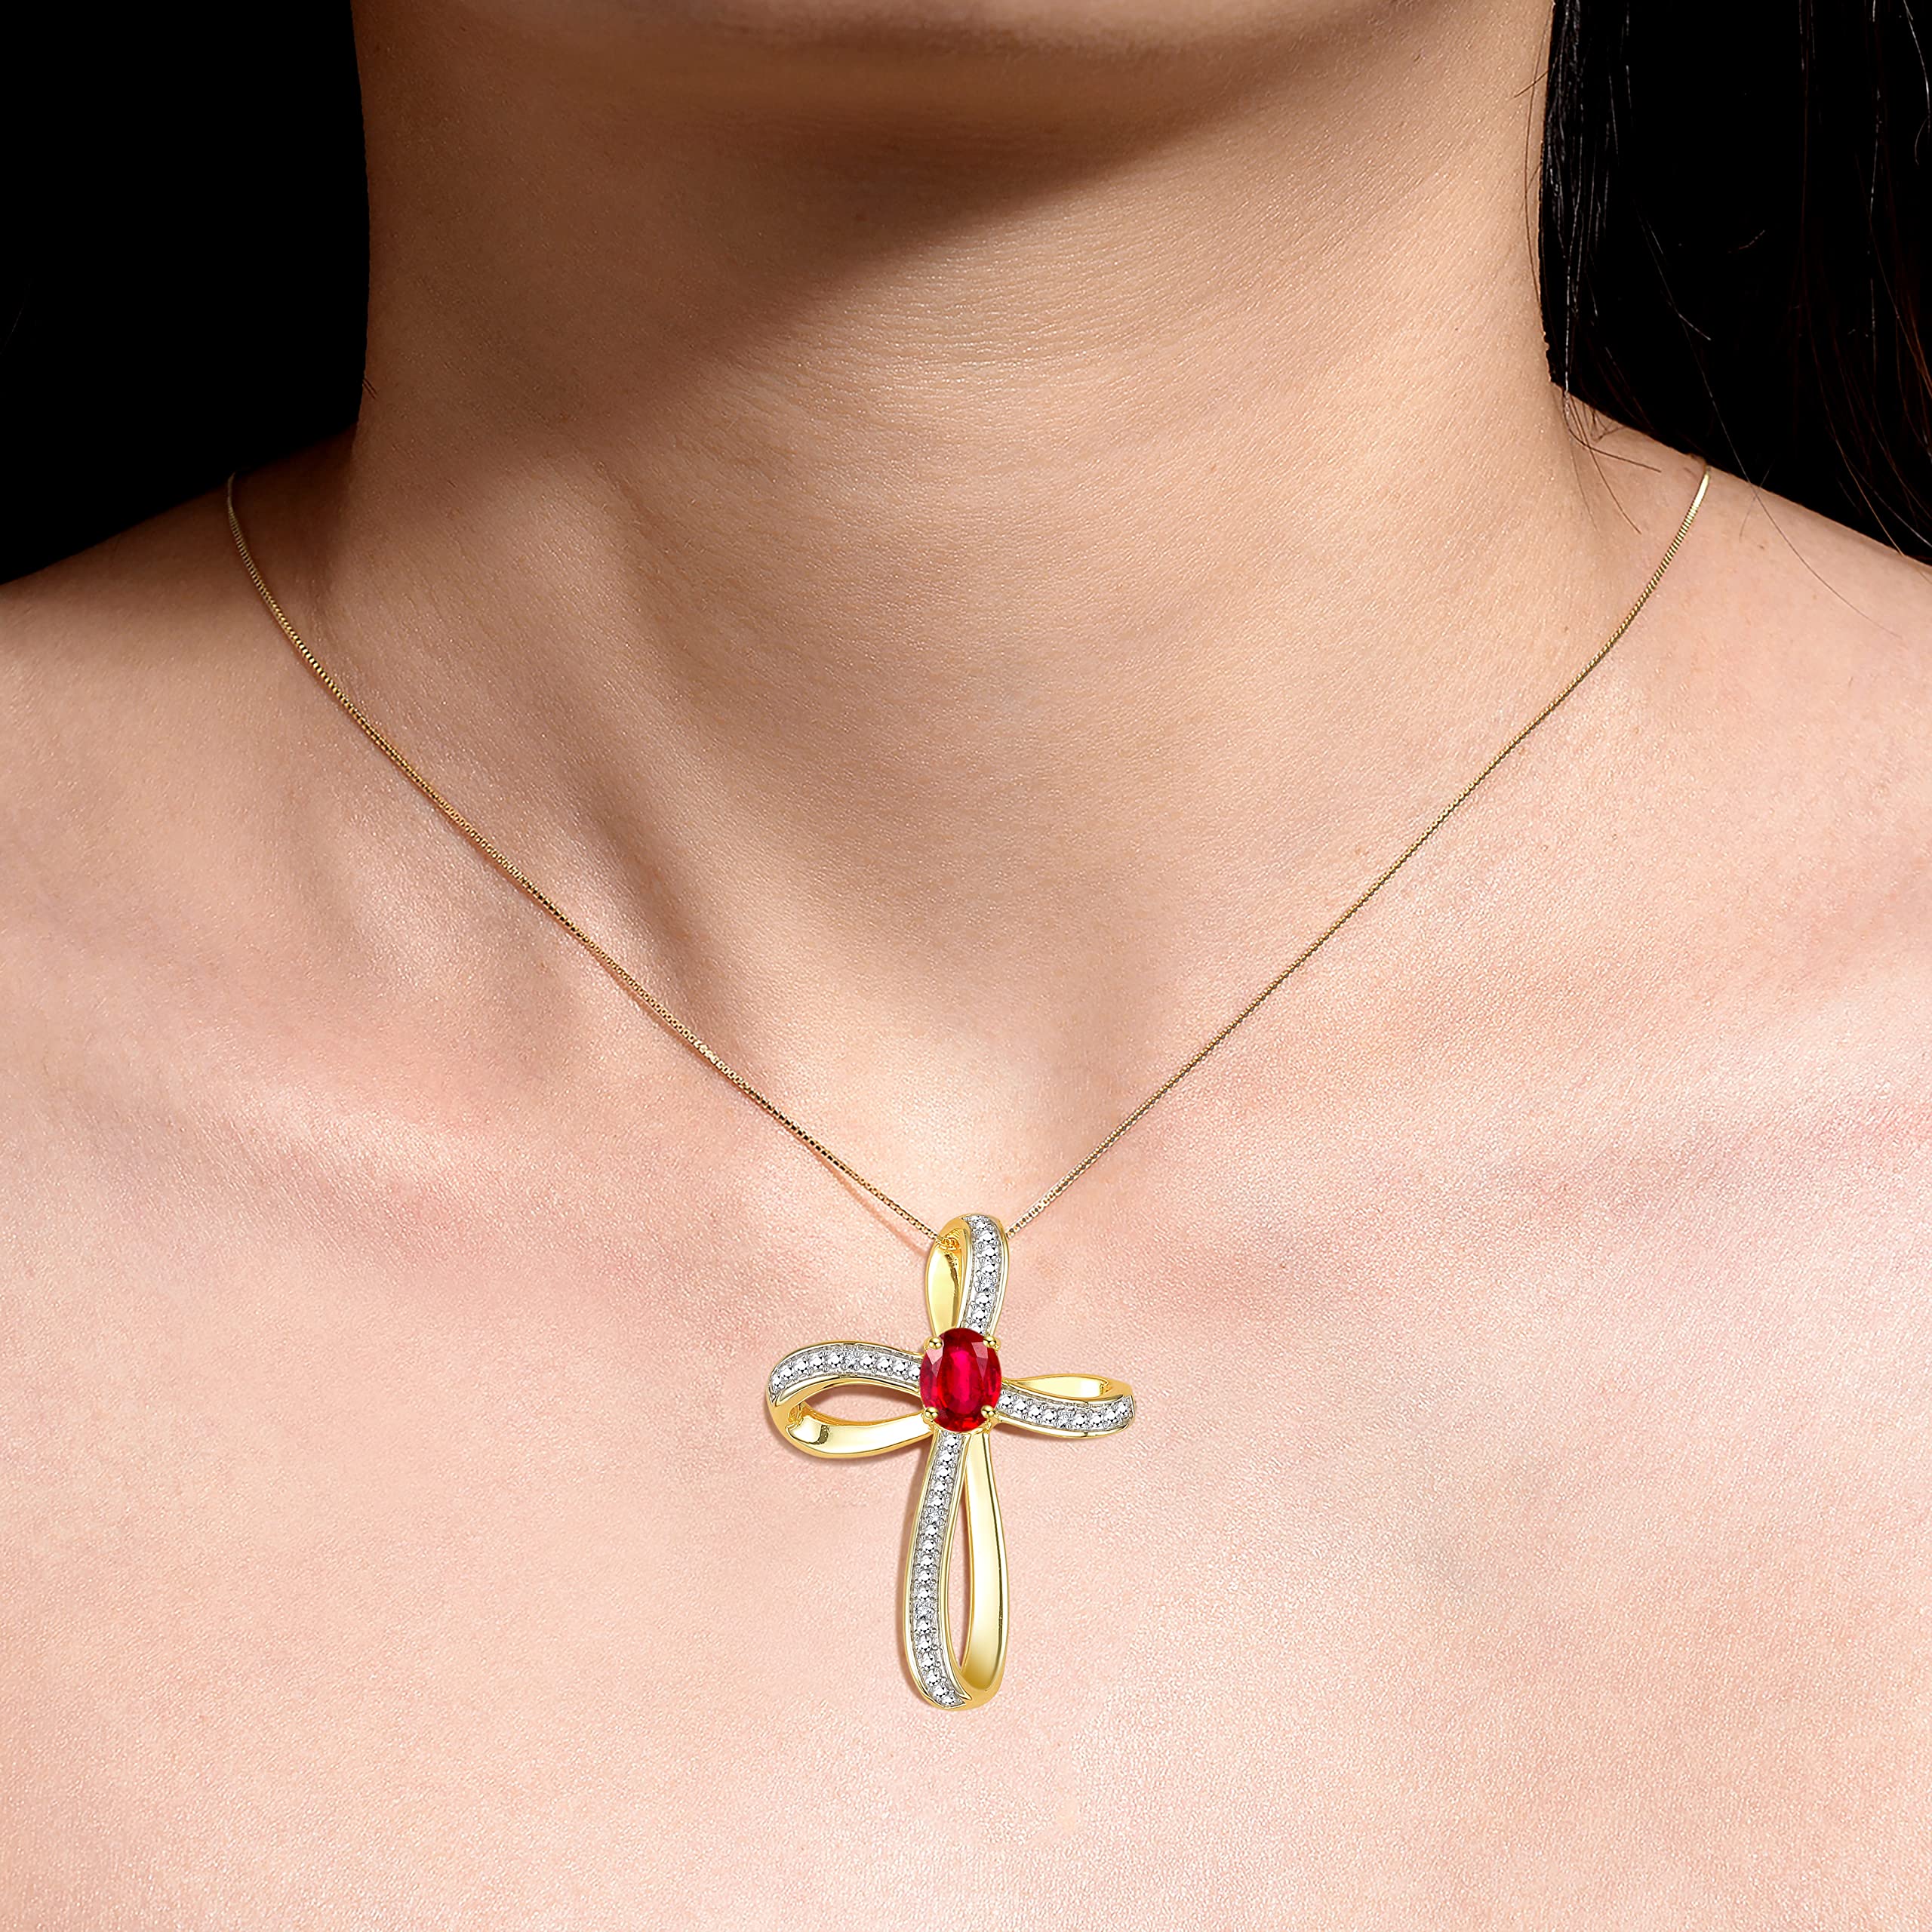 Rylos Necklaces for Women Yellow Gold Plated Silver 925 Cross Necklace Gemstone & Genuine Diamonds Pendant With 18